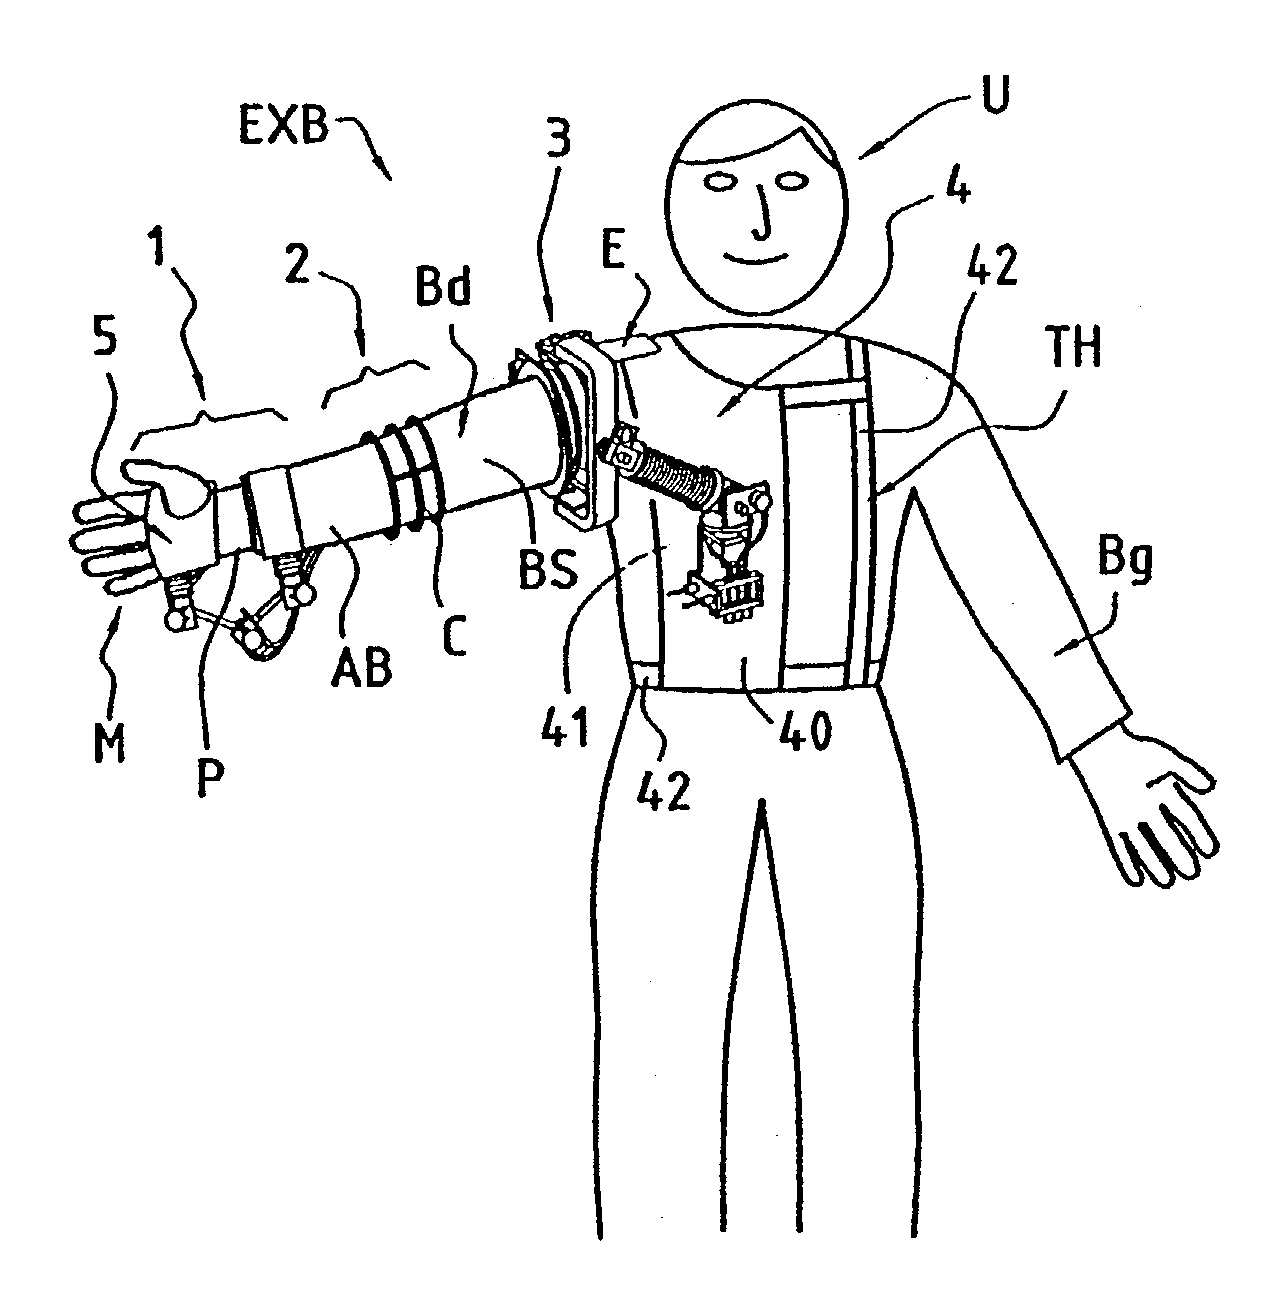 Exoskeleton for the human arm, in particular for space applications